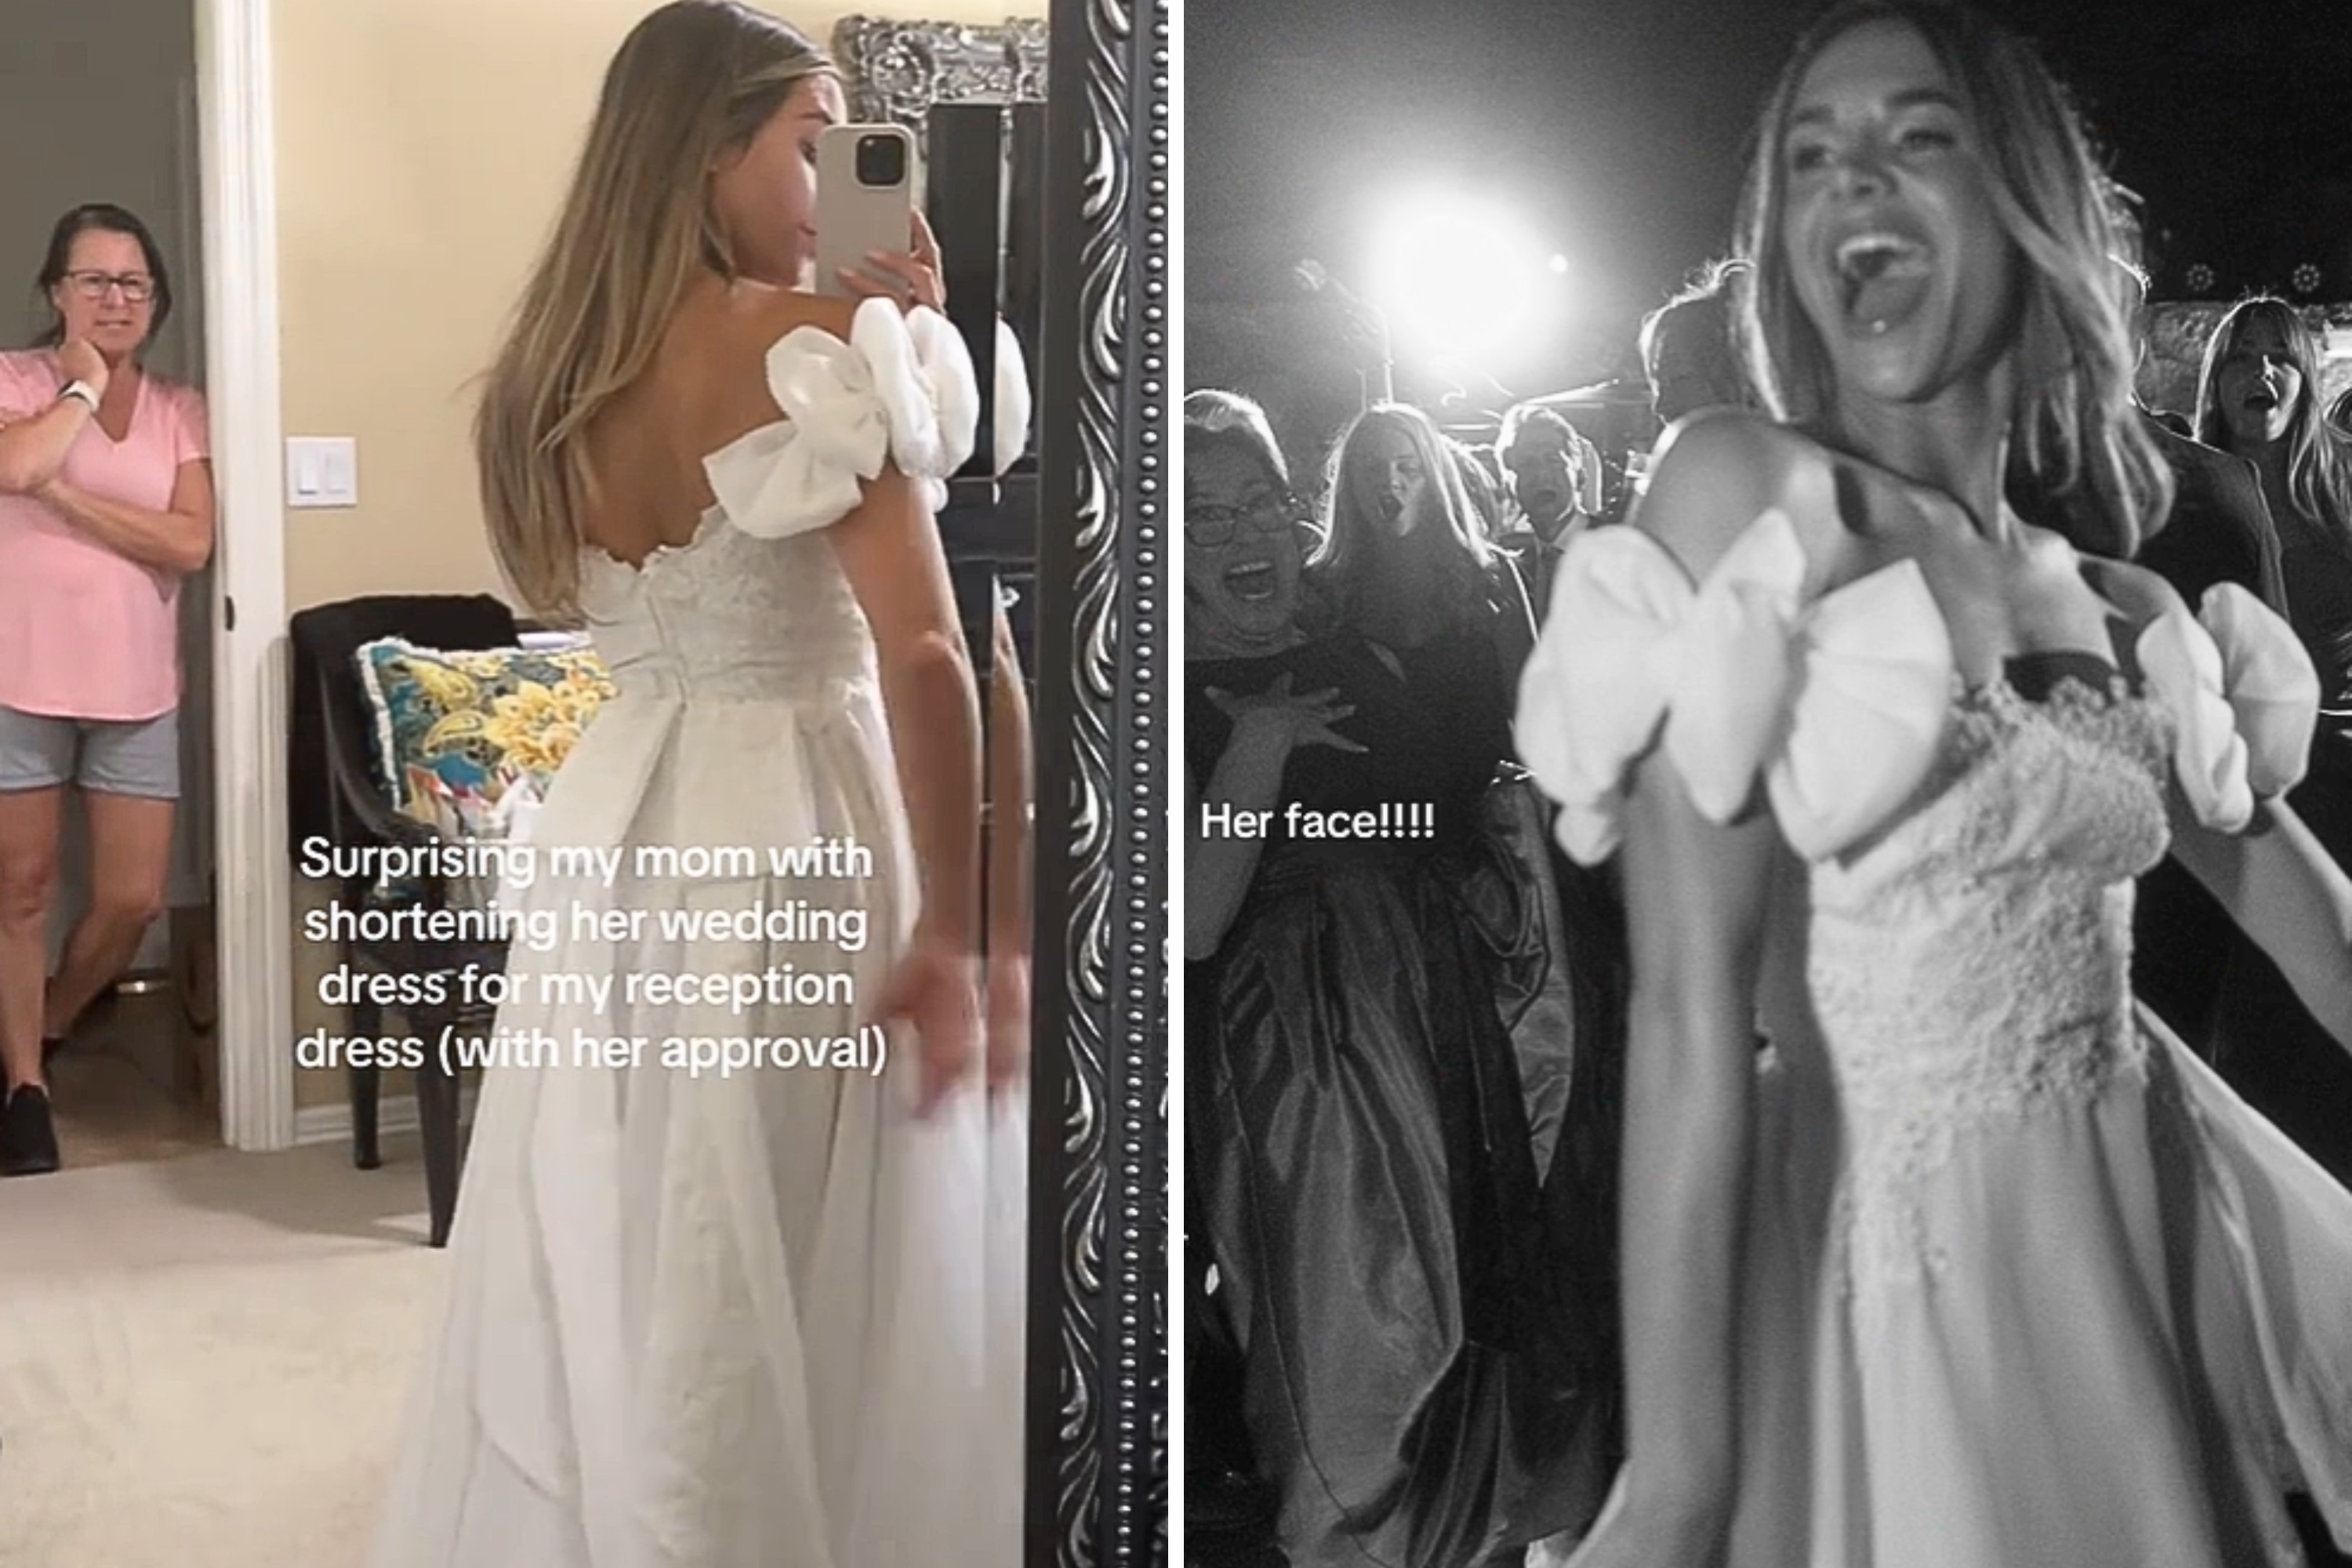 Moment mom sees daughter in her old shortened wedding dress for first time